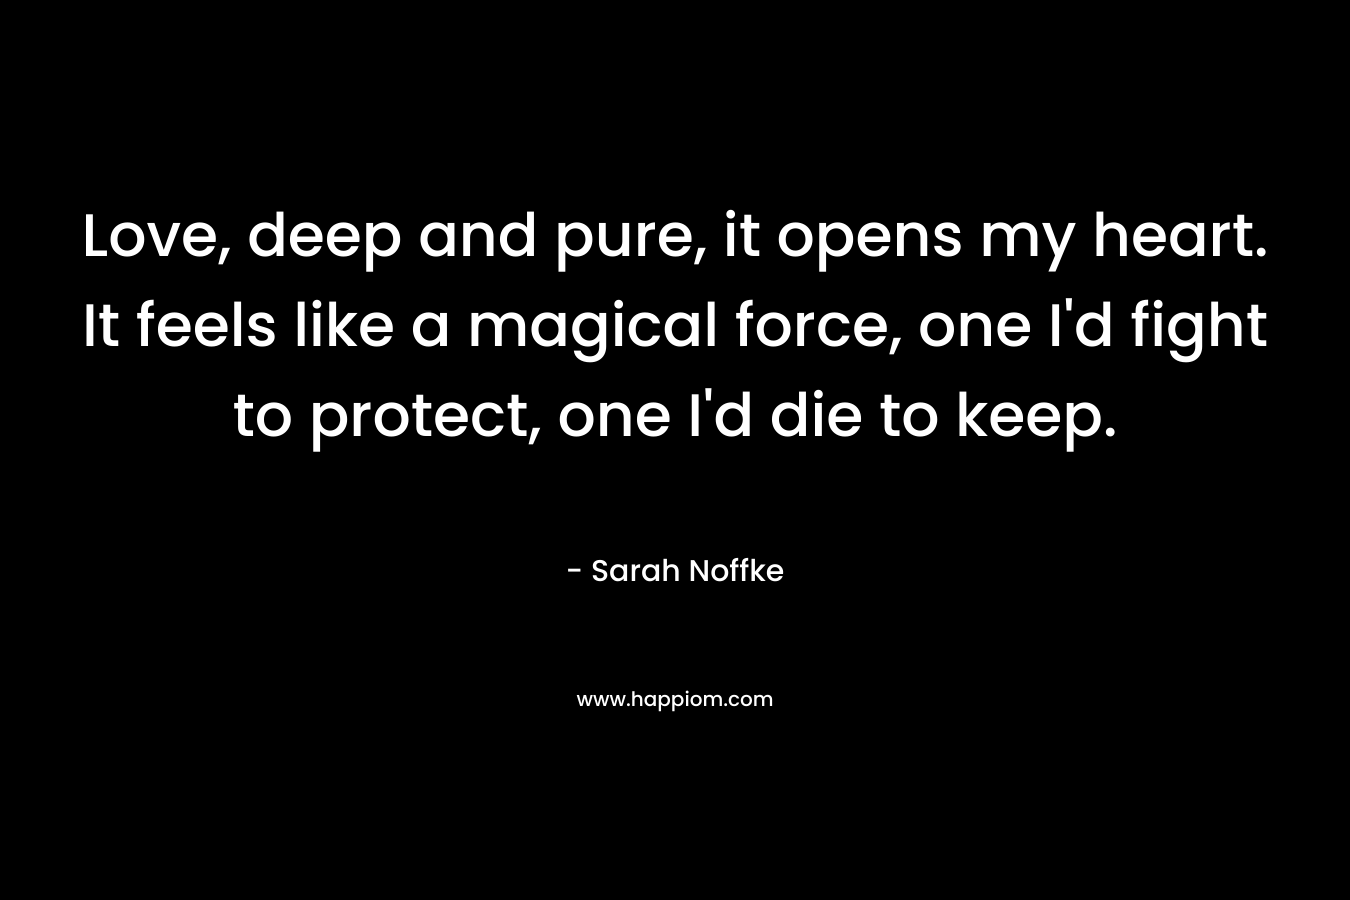 Love, deep and pure, it opens my heart. It feels like a magical force, one I’d fight to protect, one I’d die to keep. – Sarah Noffke